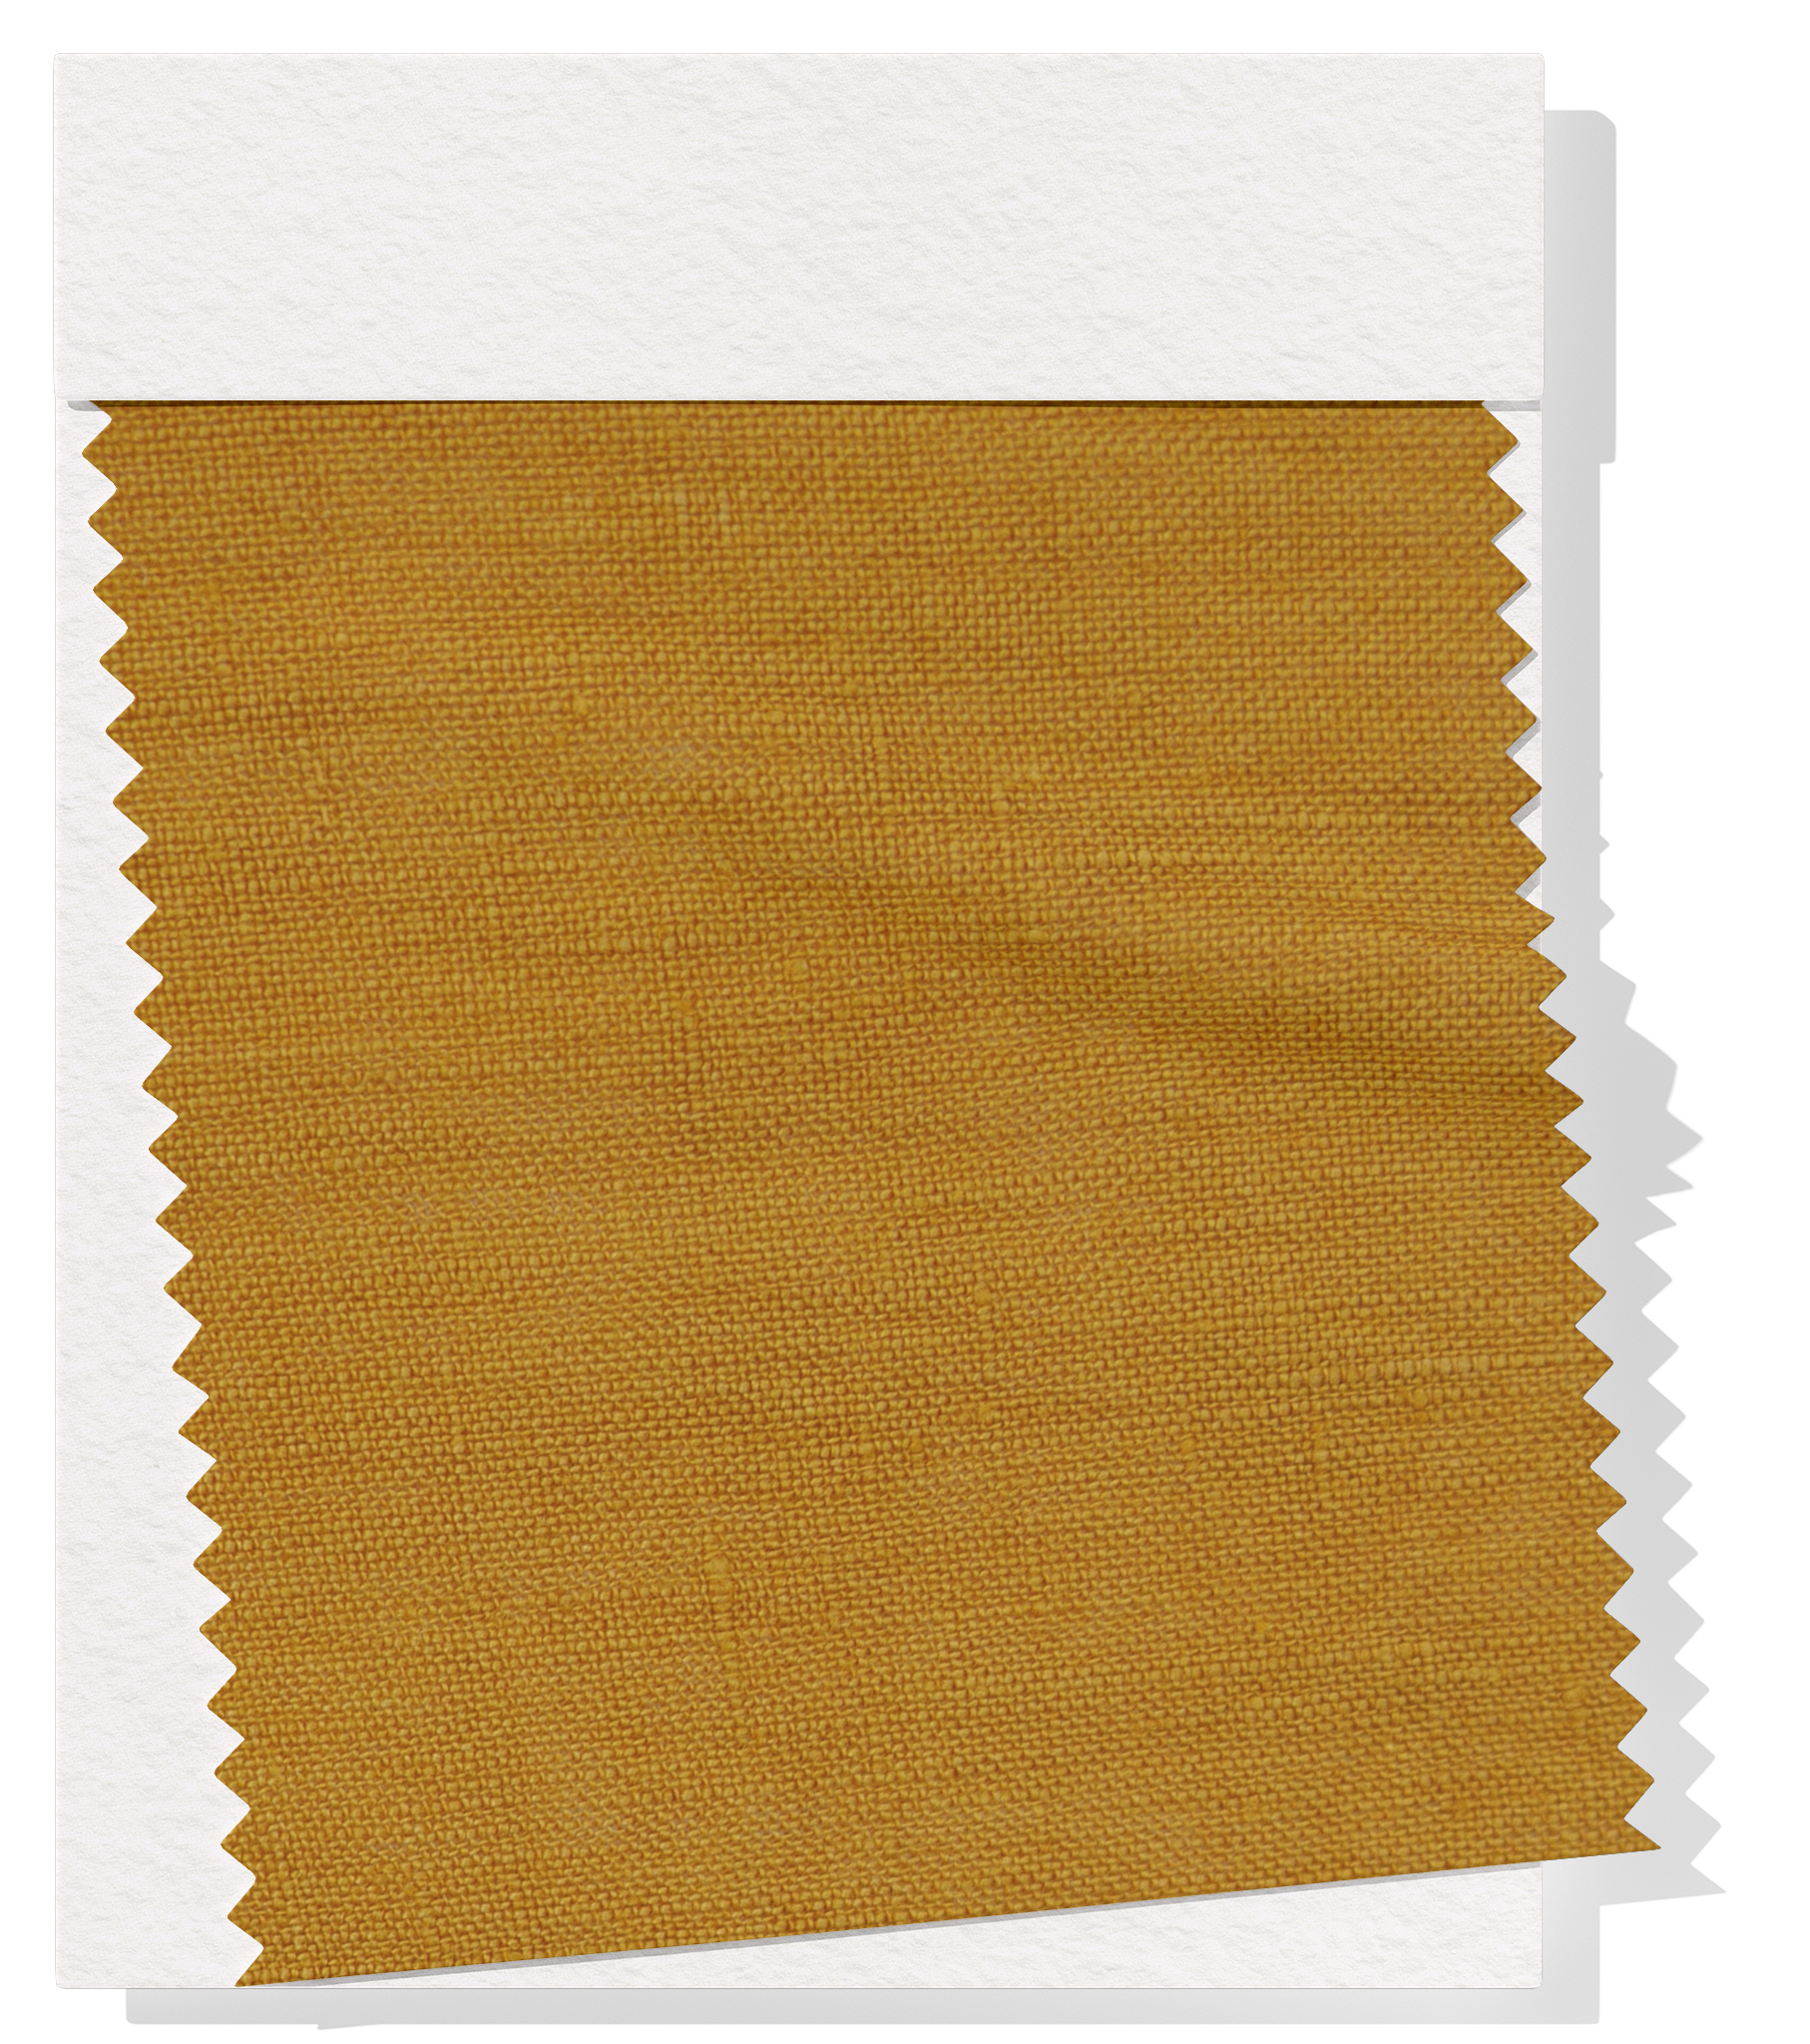 Sand Washed 100% Linen $28.00p/m - Mustard